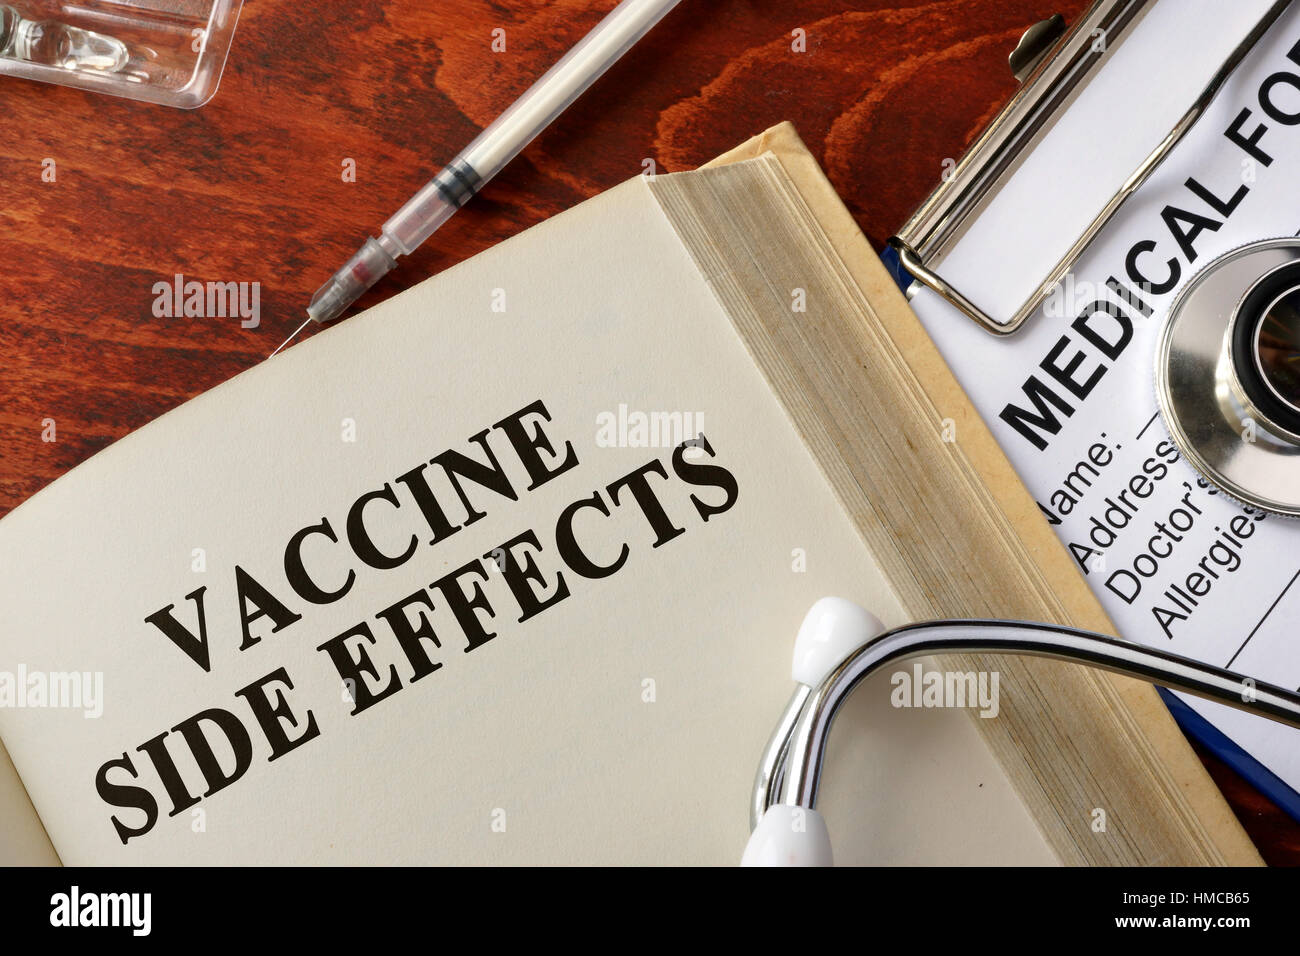 Title vaccine side effects on a book. Stock Photo